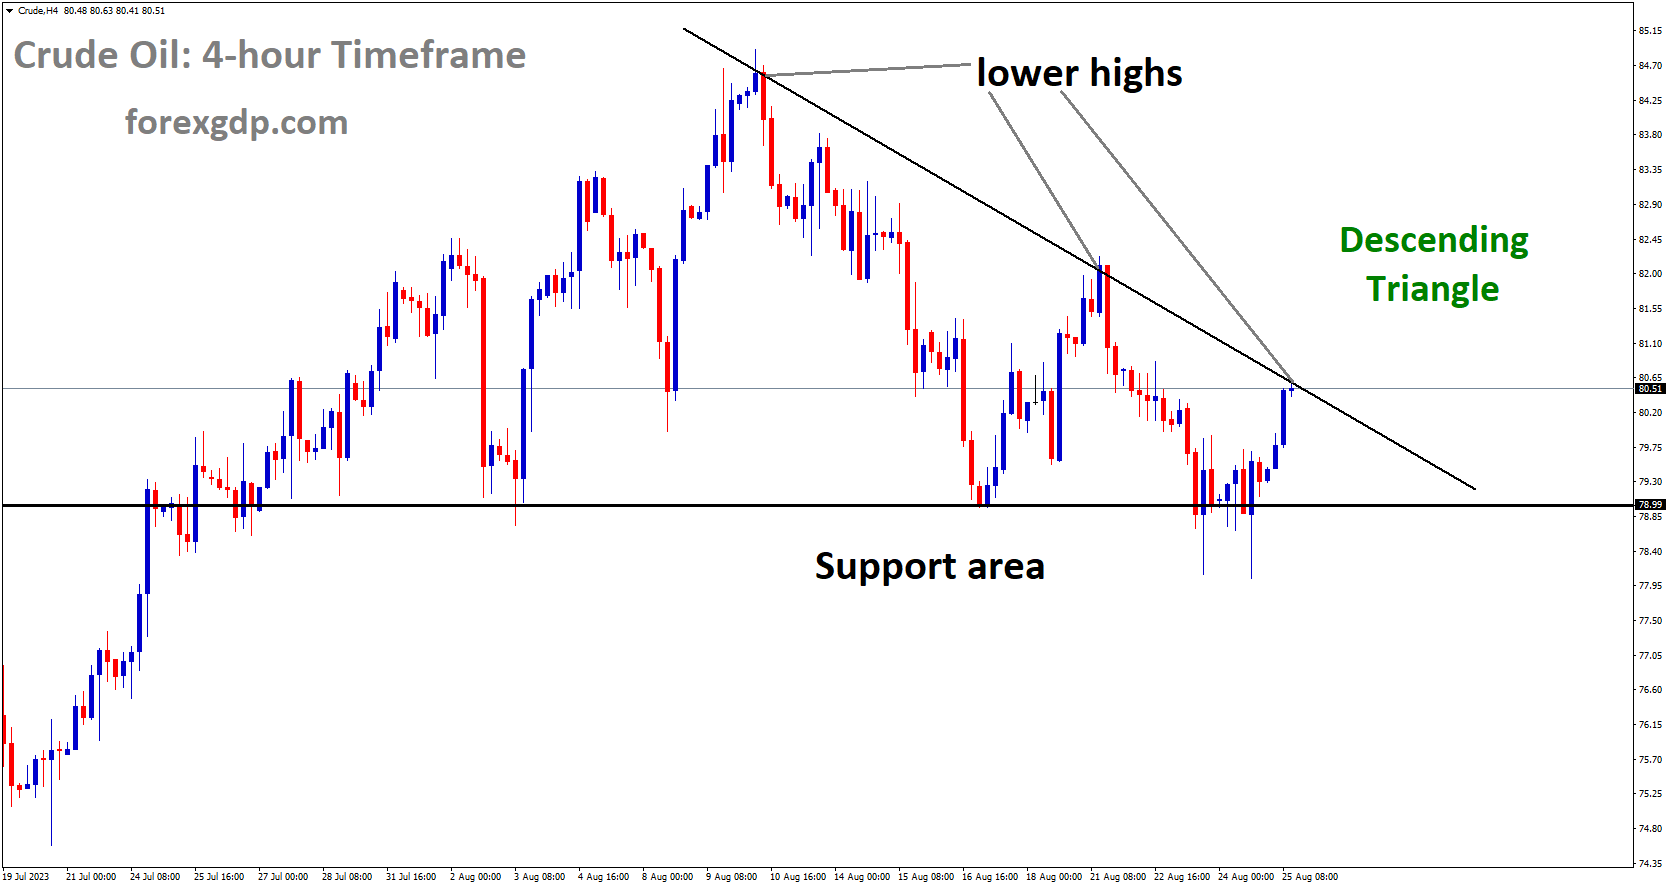 Crude Oil is moving in Descending Triangle and market has reached lower high area of the channel